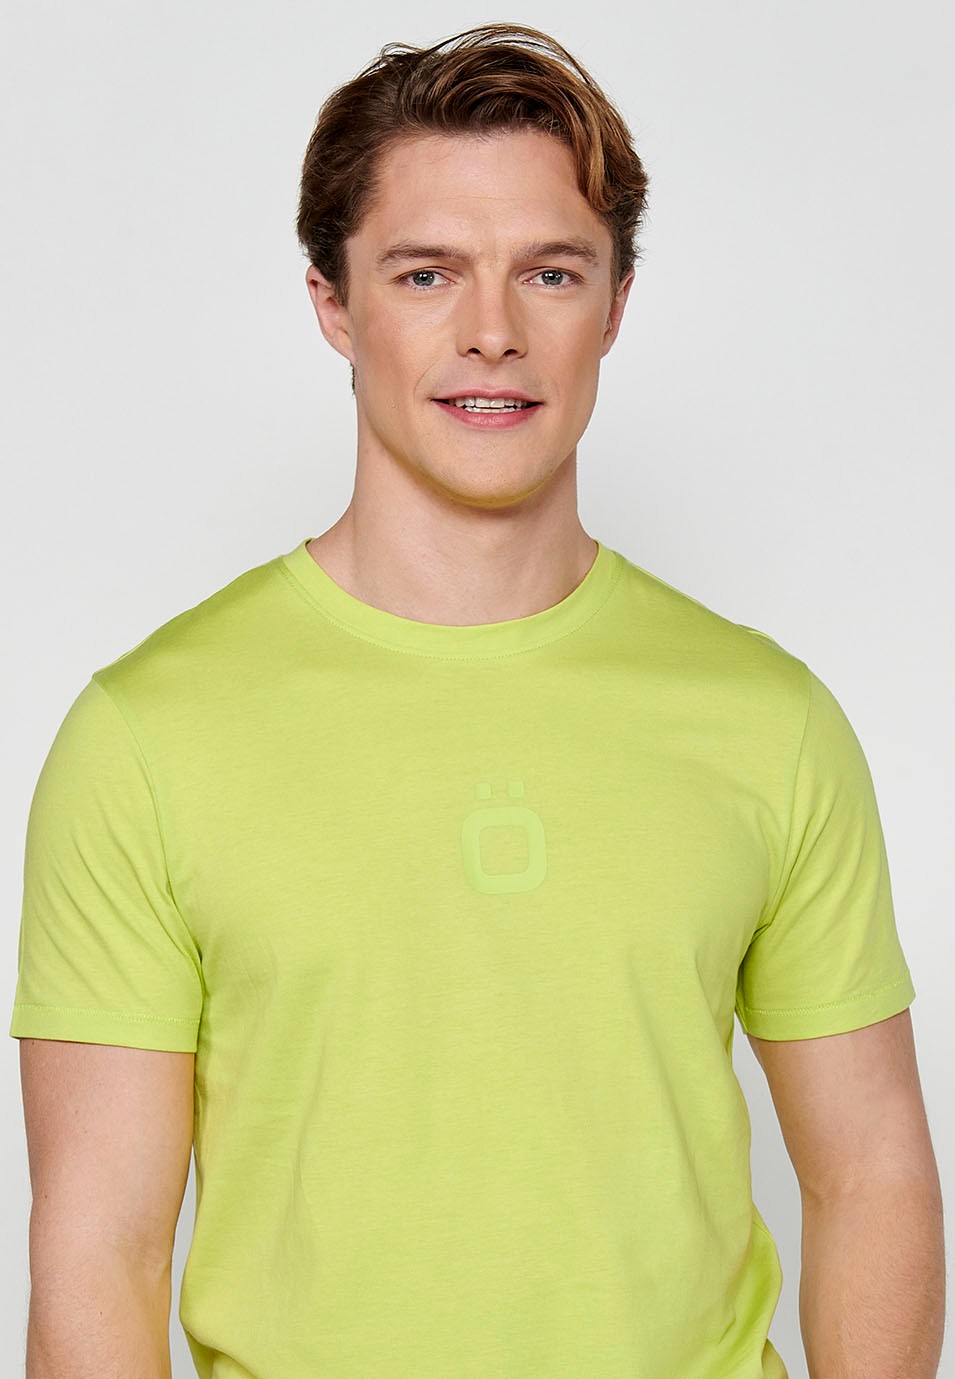 Short sleeve round neck t-shirt with front logo in lime color for men